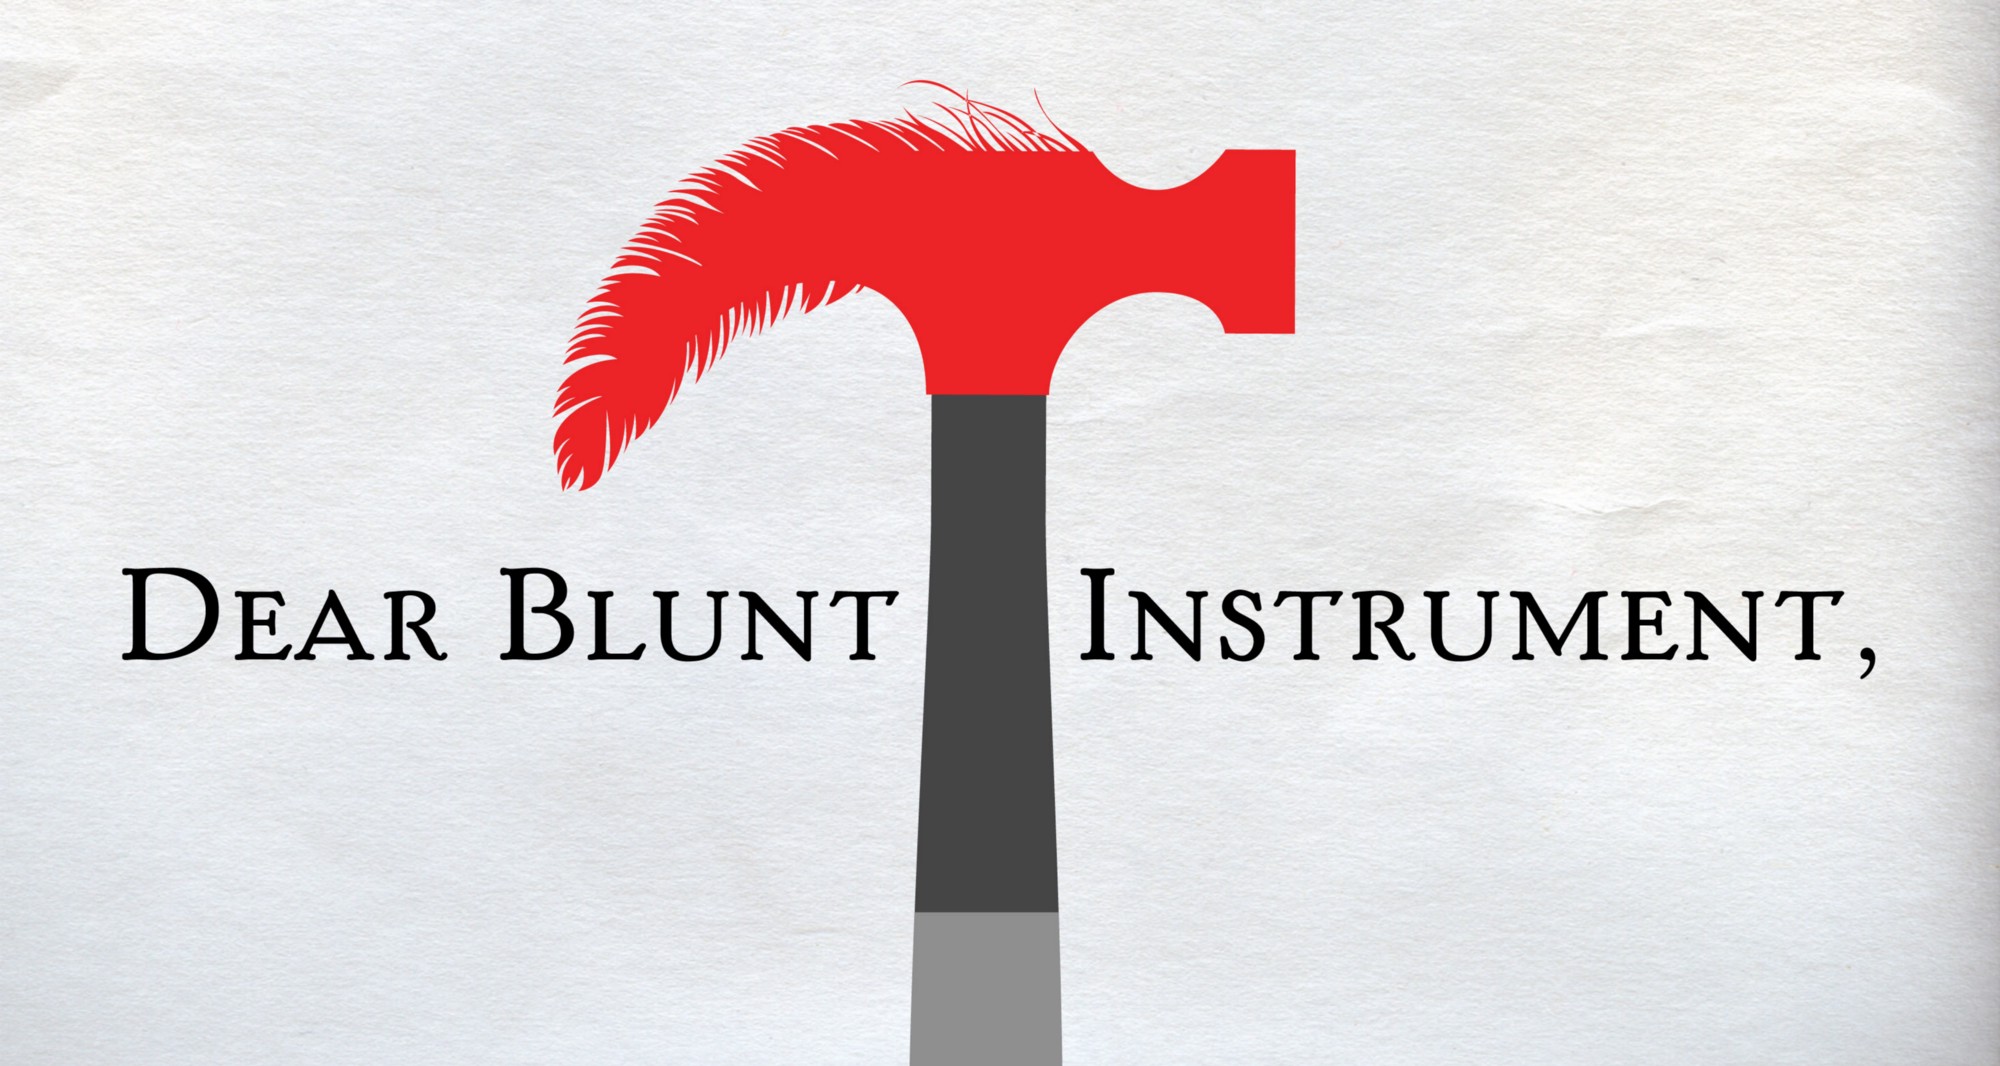 Logo for "The Blunt Instrument"